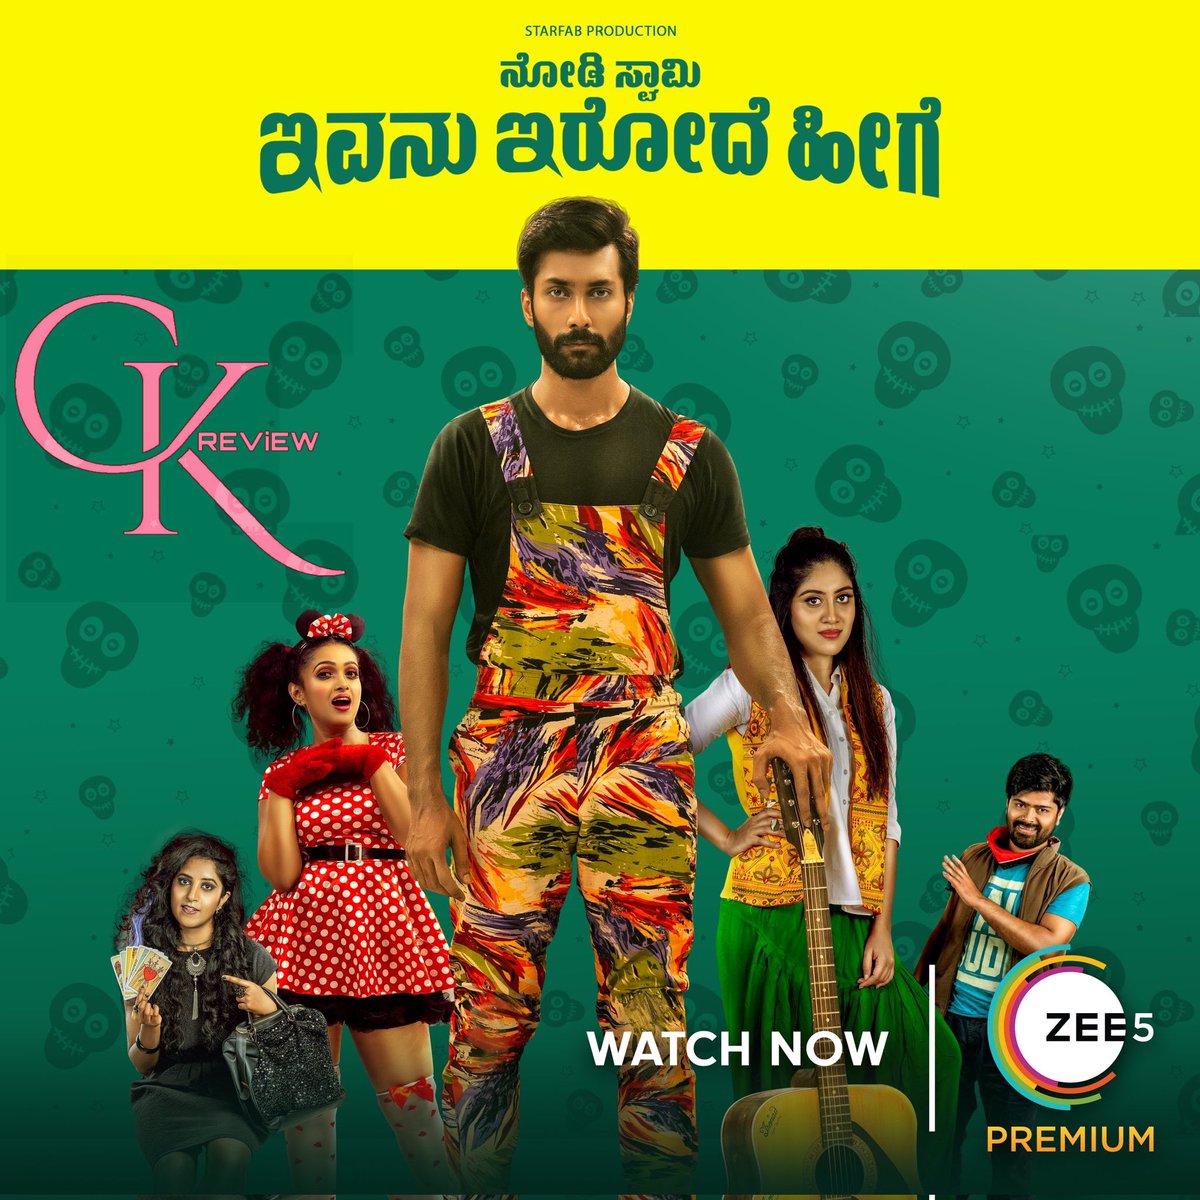 #NodiSwamyIvanuIrodeHeege (Kannada|2022) - ZEE5.

Comical treatment to a serious issue (Mental Depression) backfires bigtime. Film is neither serious nor funny. Couldnt relate to any characters. Decent Perf. Though its a honest attempt, Movie fails to provide Entertainment. SKIP!